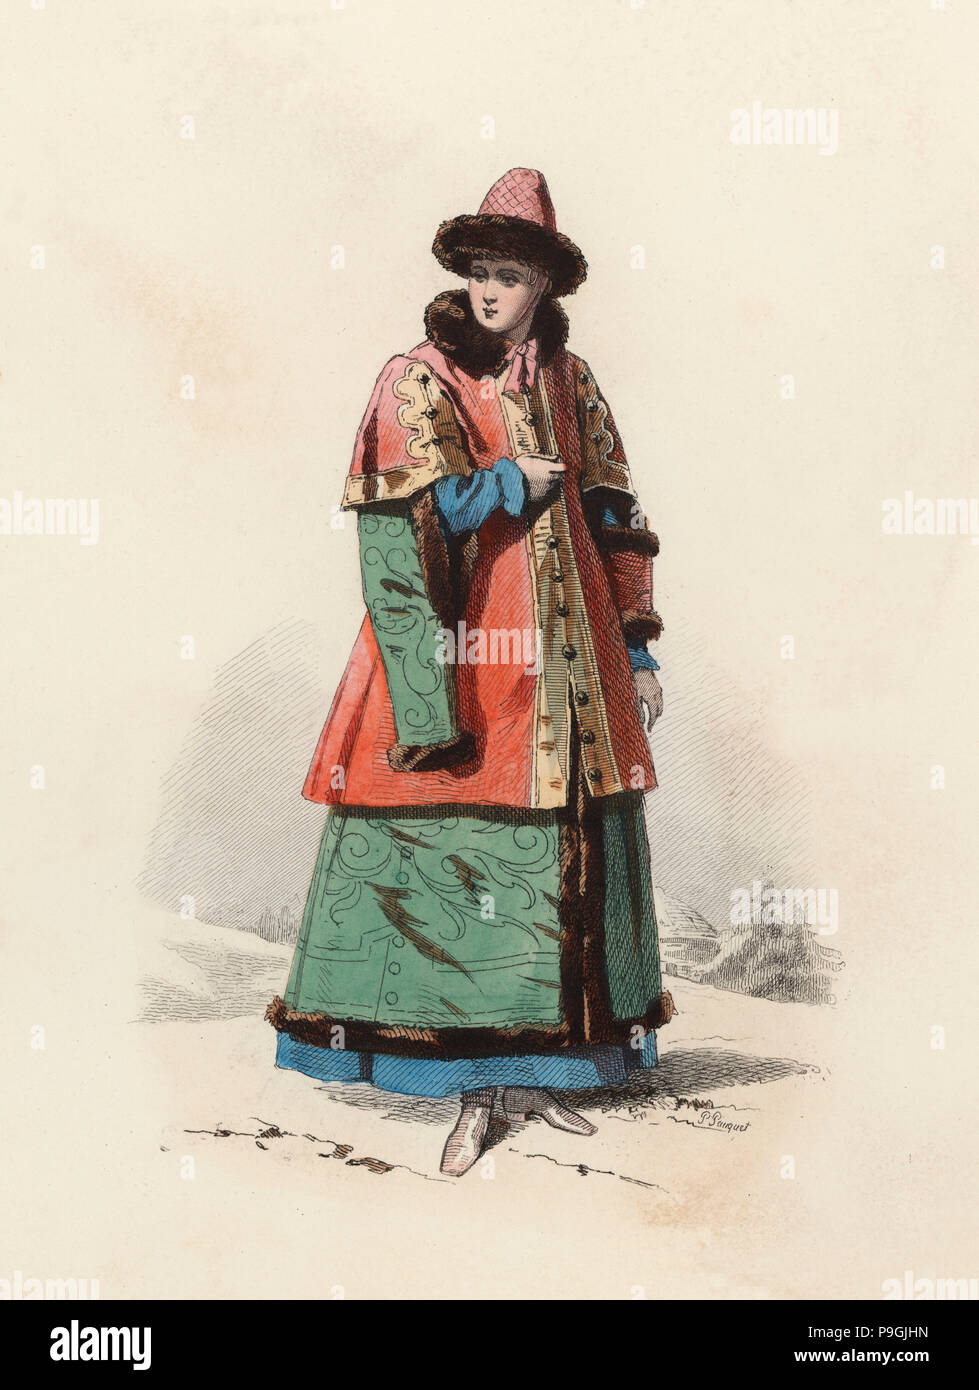 Daughter of Boyar Great Duke of Moscow in the Modern Age, color engraving 1870. Stock Photo